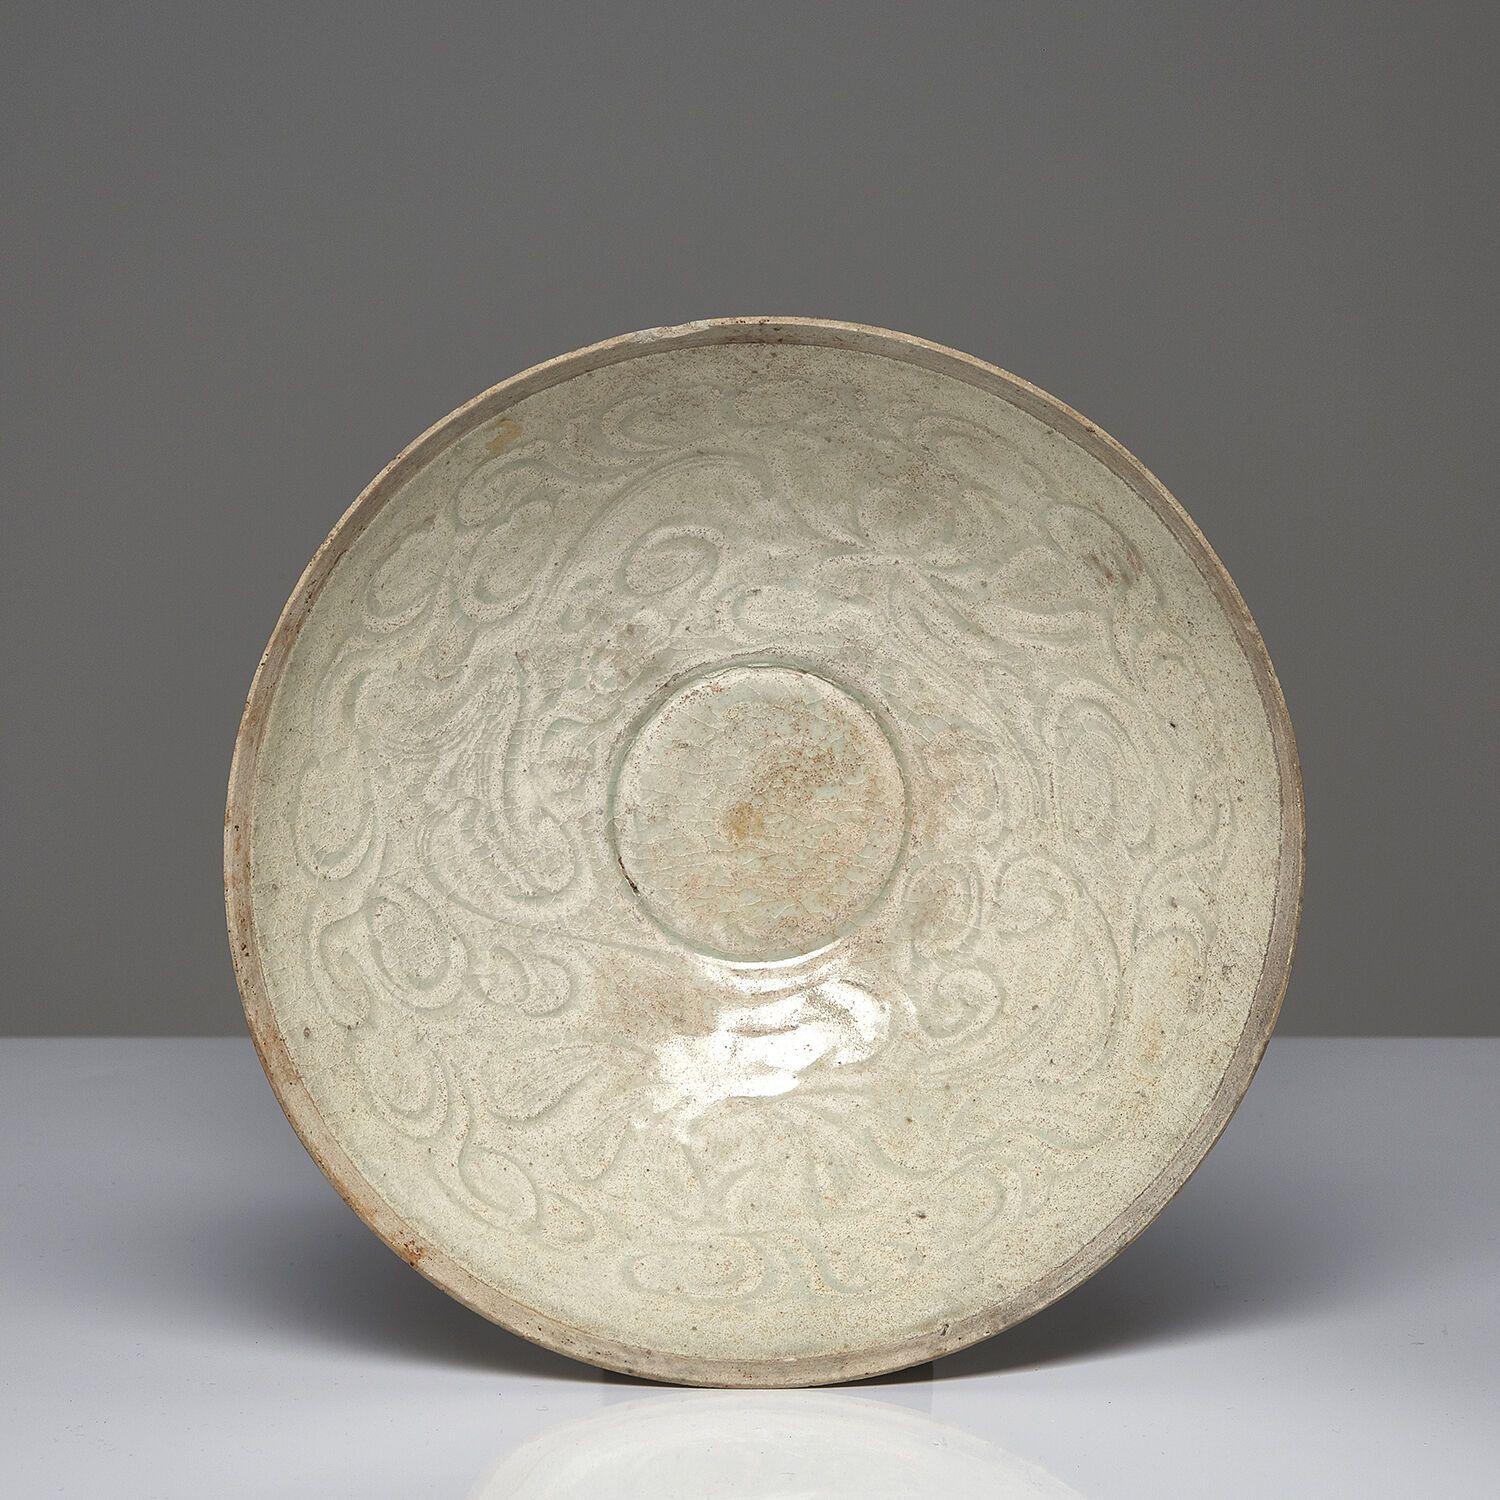 CHINE, ÉPOQUE SONG, X-XIIe SIÈCLE CHINA, SONG PERIOD, 10th-12th CENTURY

A Qingb&hellip;